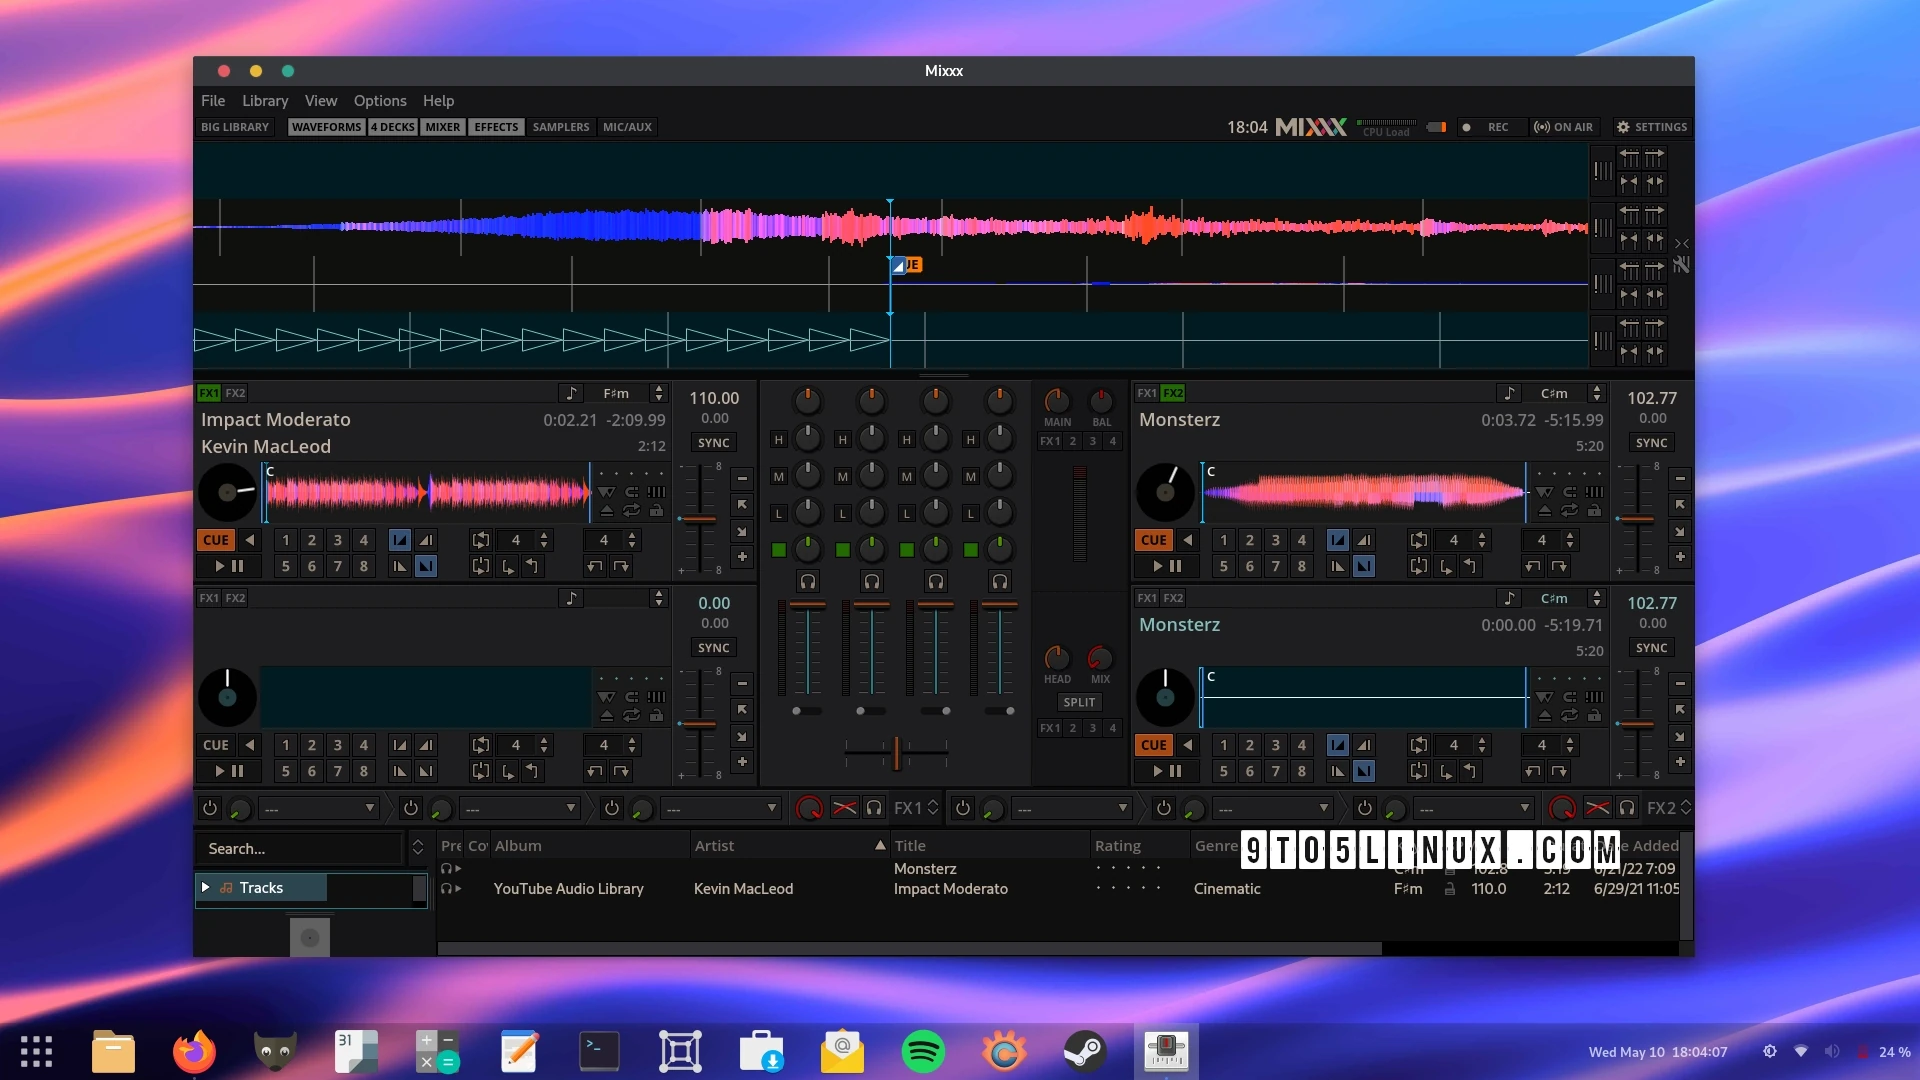 Mixxx 2.3.5 Free DJ Software Improves Support for Pioneer DDJ-400, Hercules P32